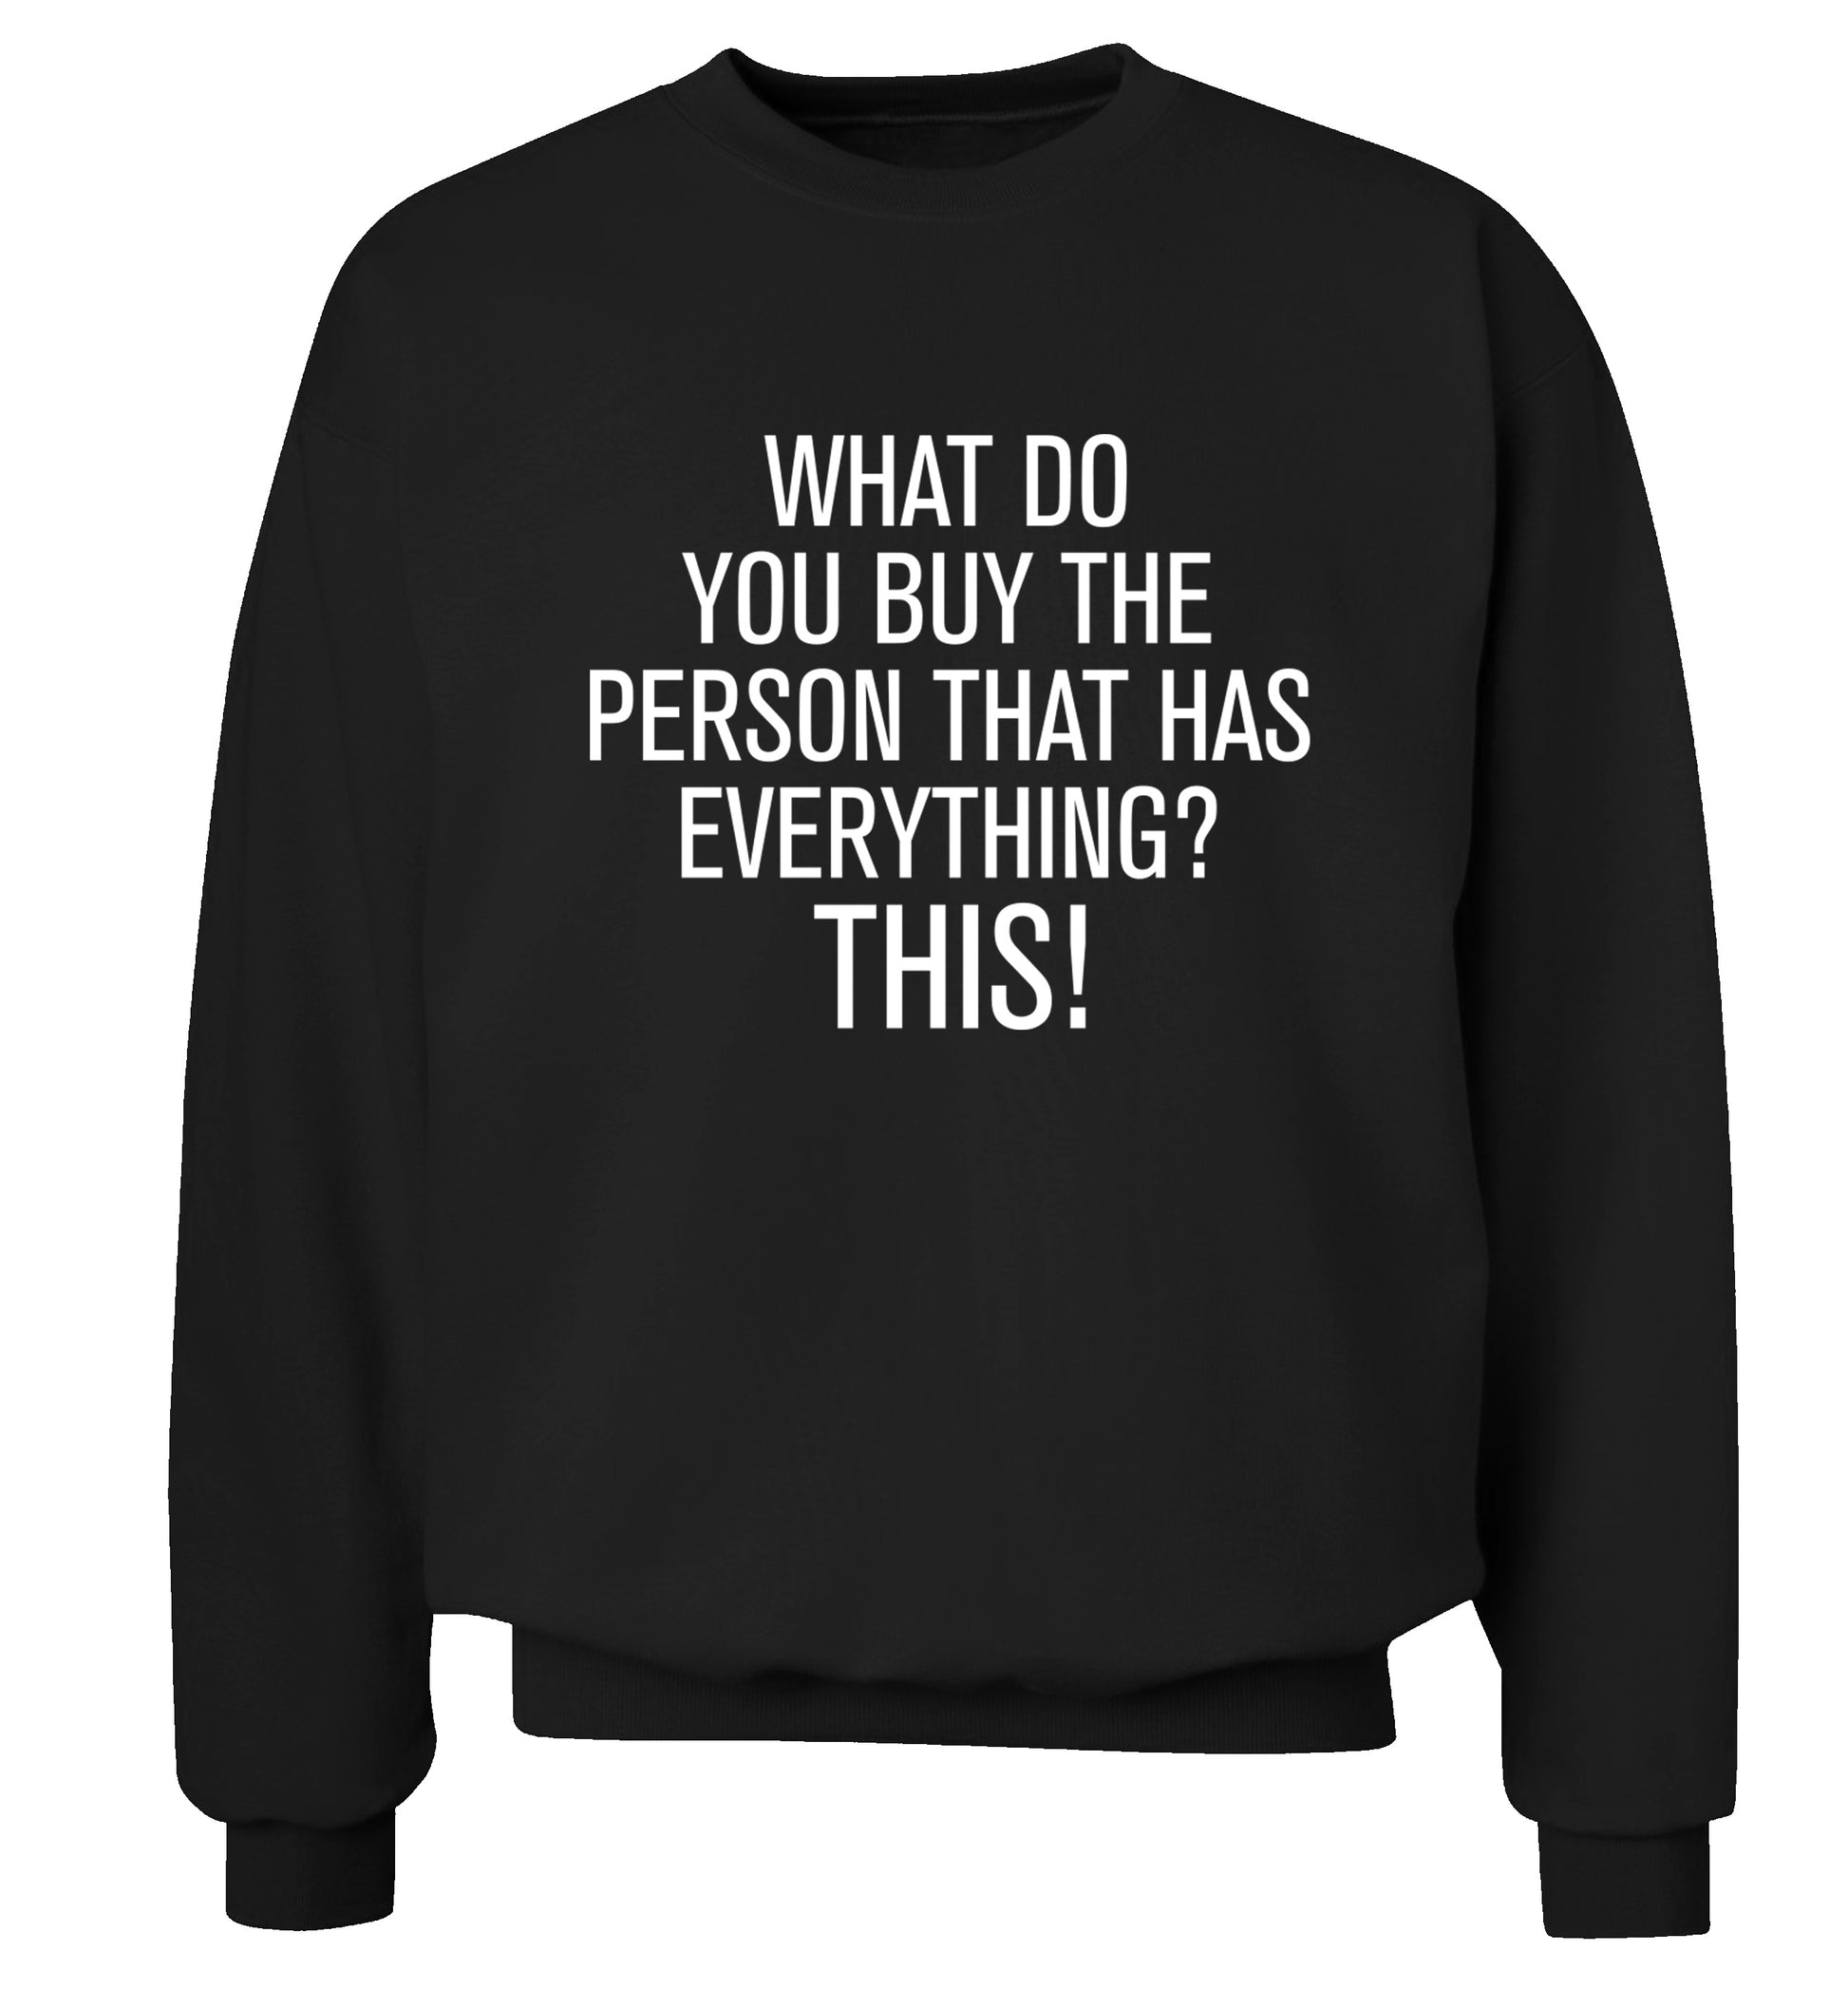 What do you buy the person that has everything? This! Adult's unisex black Sweater 2XL